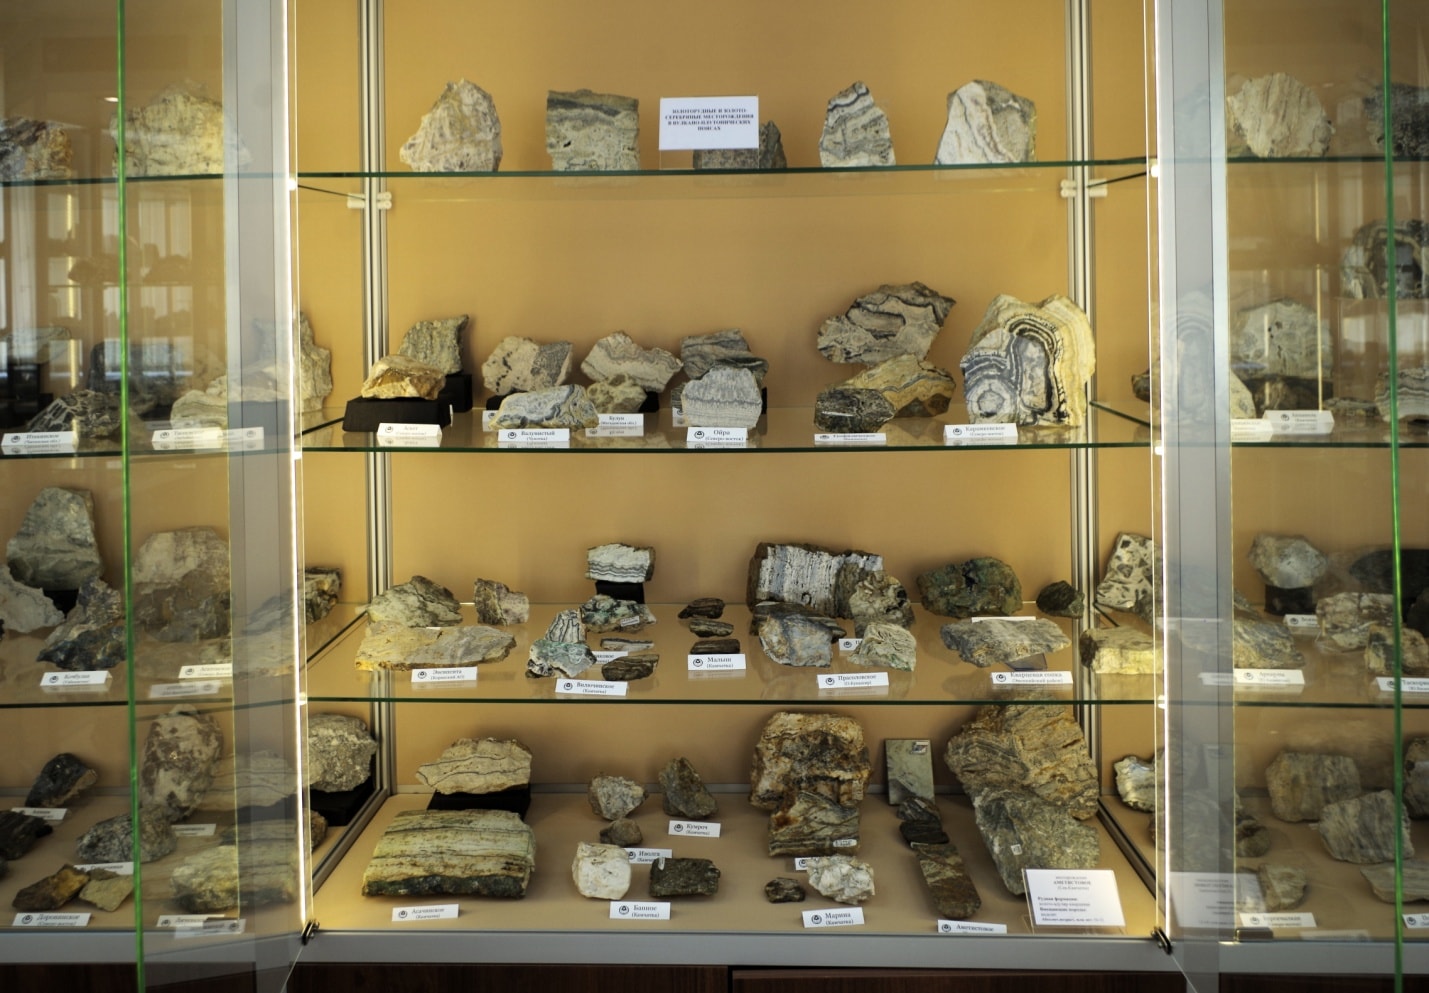 The “Ore deposits of precious metals” section of the Museum exposition